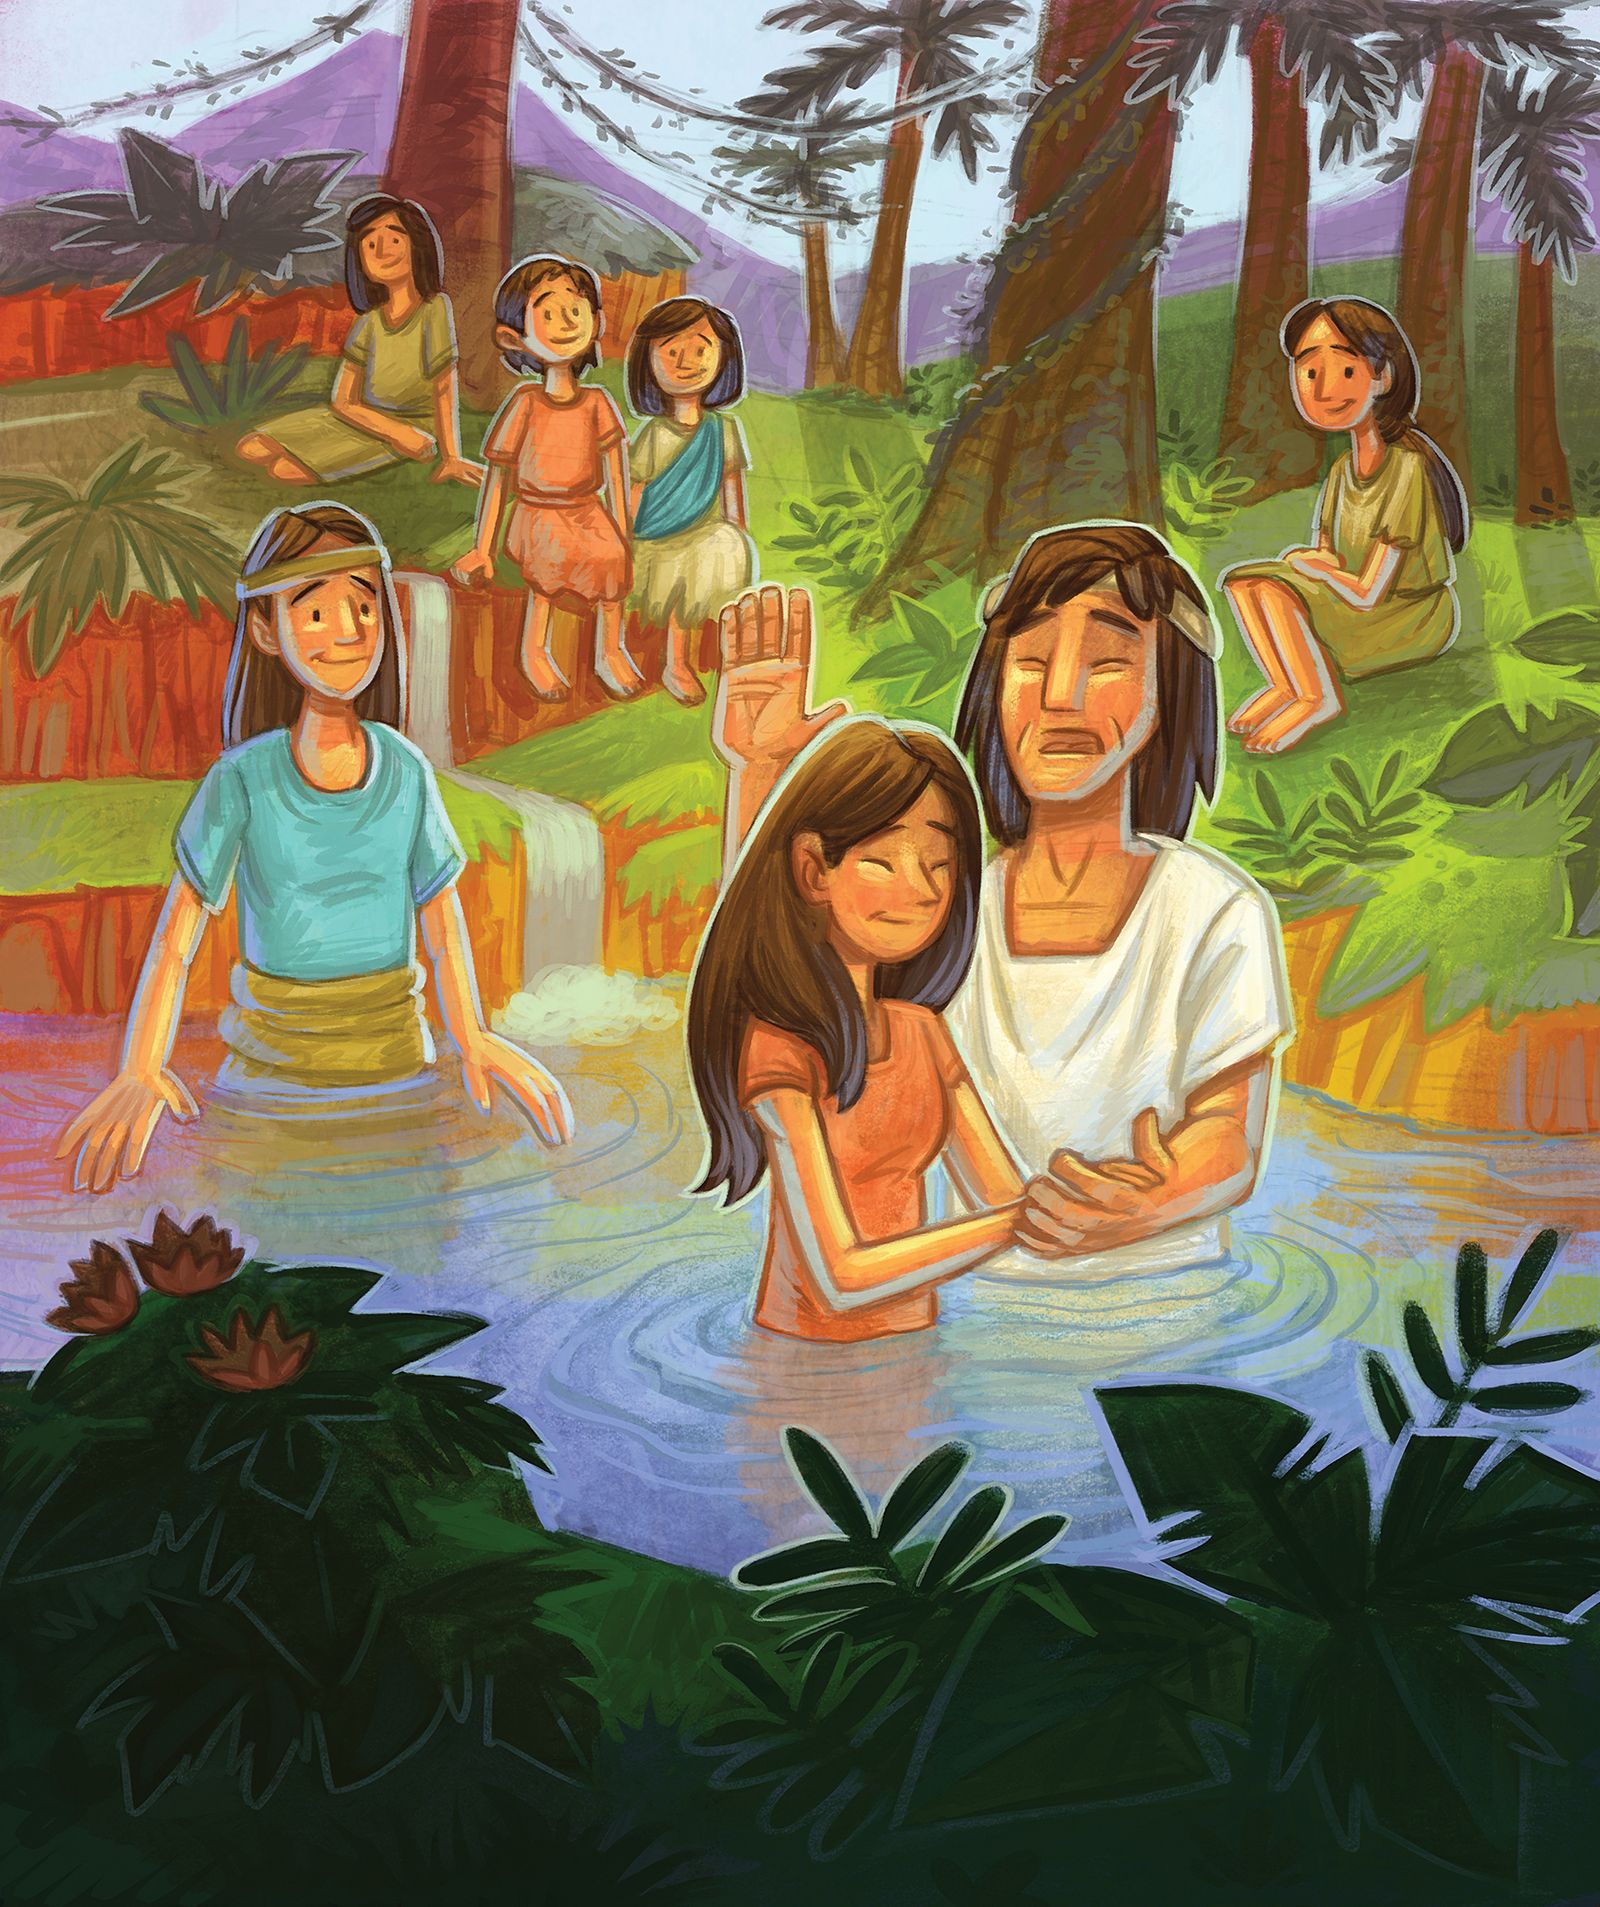 A man baptizes a woman in a river while other people watch and wait to be baptized.